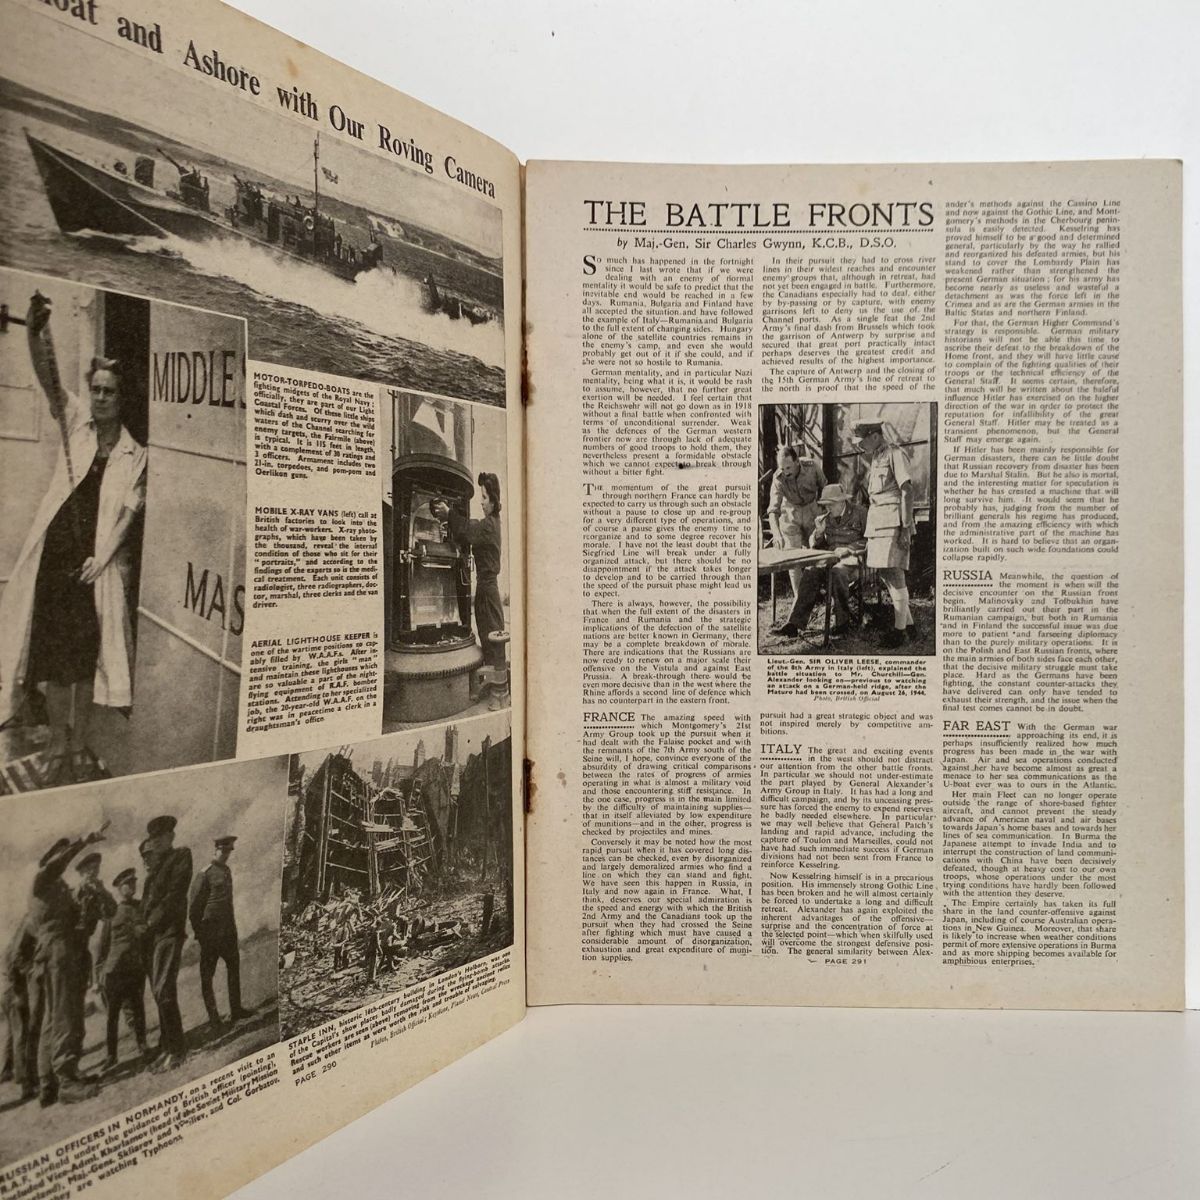 THE WAR ILLUSTRATED - Vol 8, No 190, 29th Sept 1944